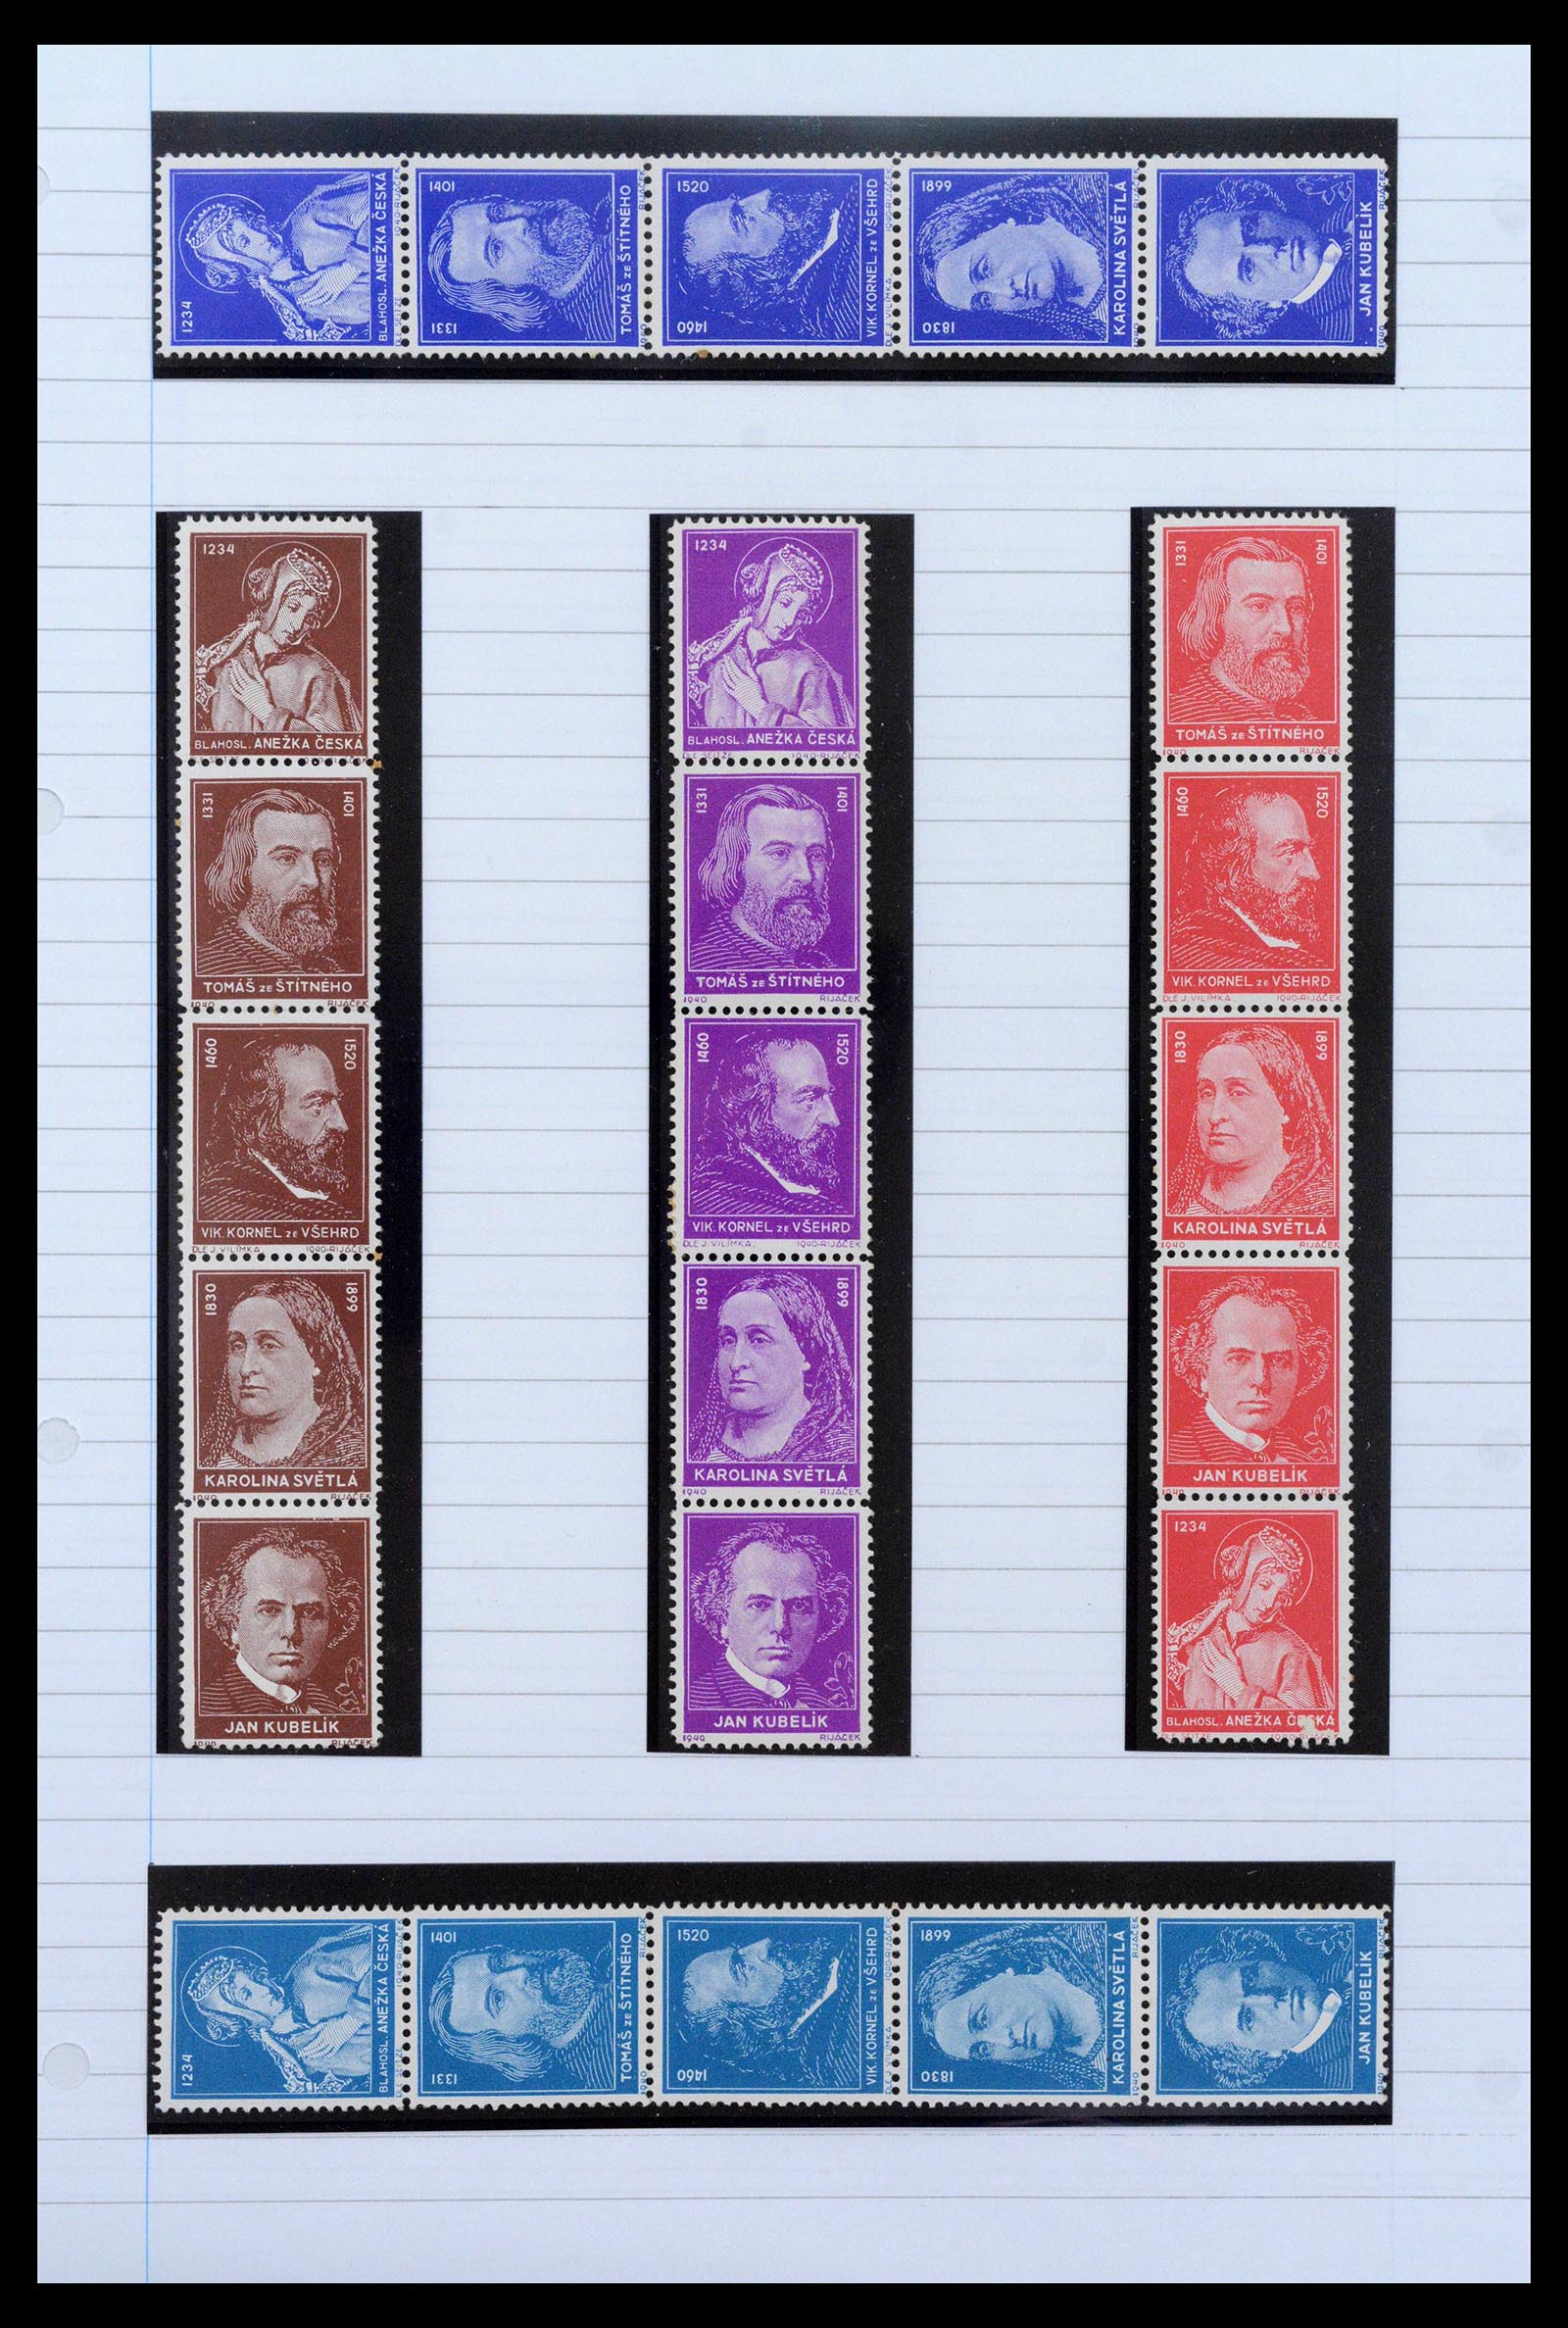 39165 0033 - Stamp collection 39165 Czechoslovakia specialised 1919-1970.